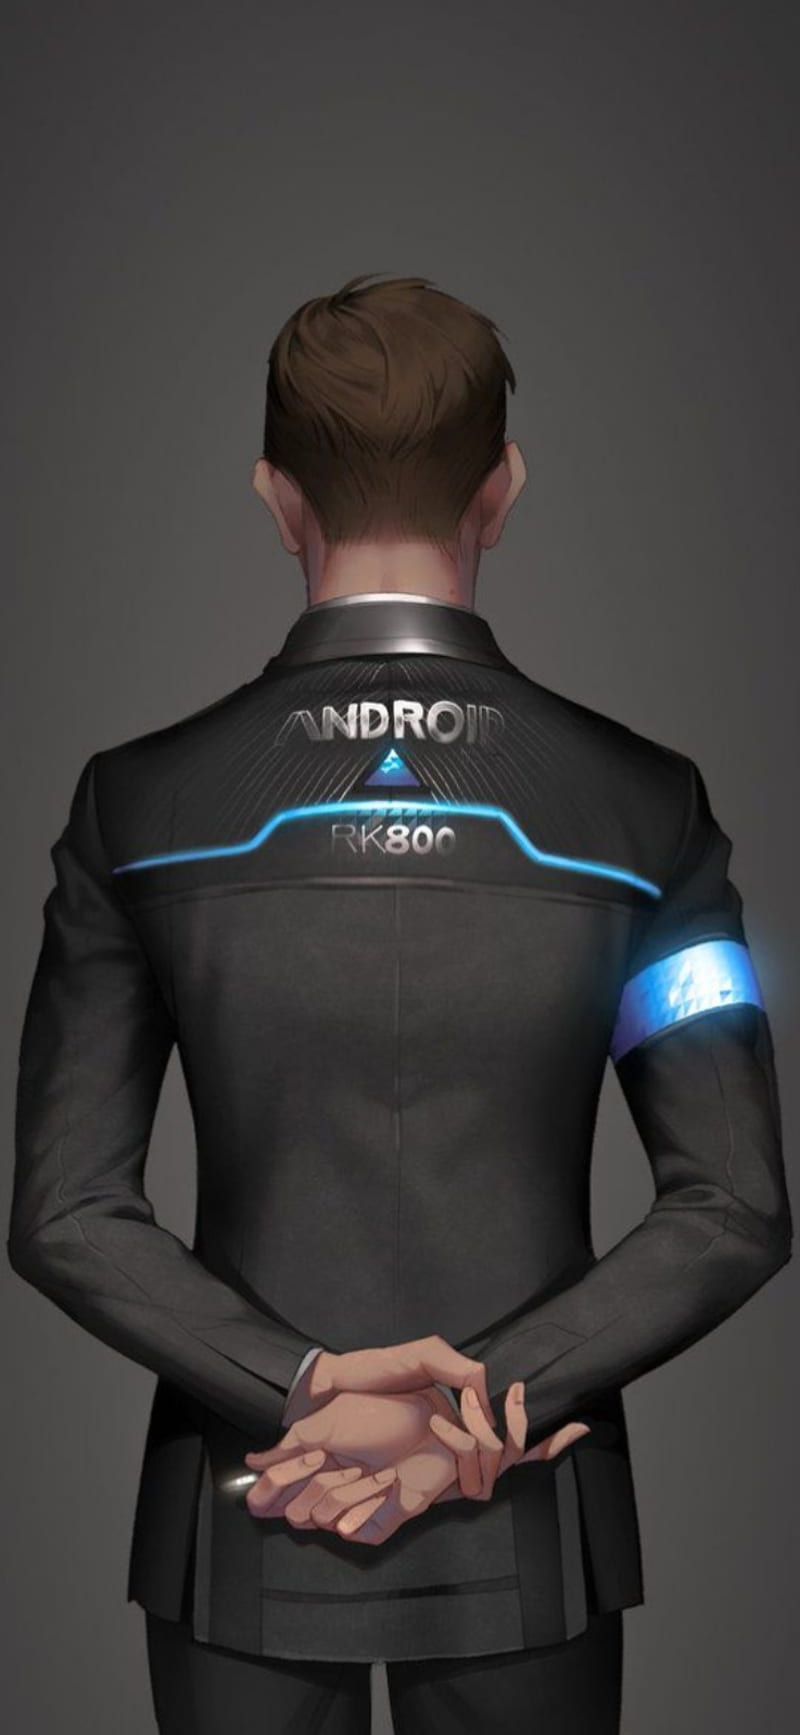 Rk800 , androide, connor, detroit become human, detroit bh, game, hank anderson, robot, HD phone wallpaper